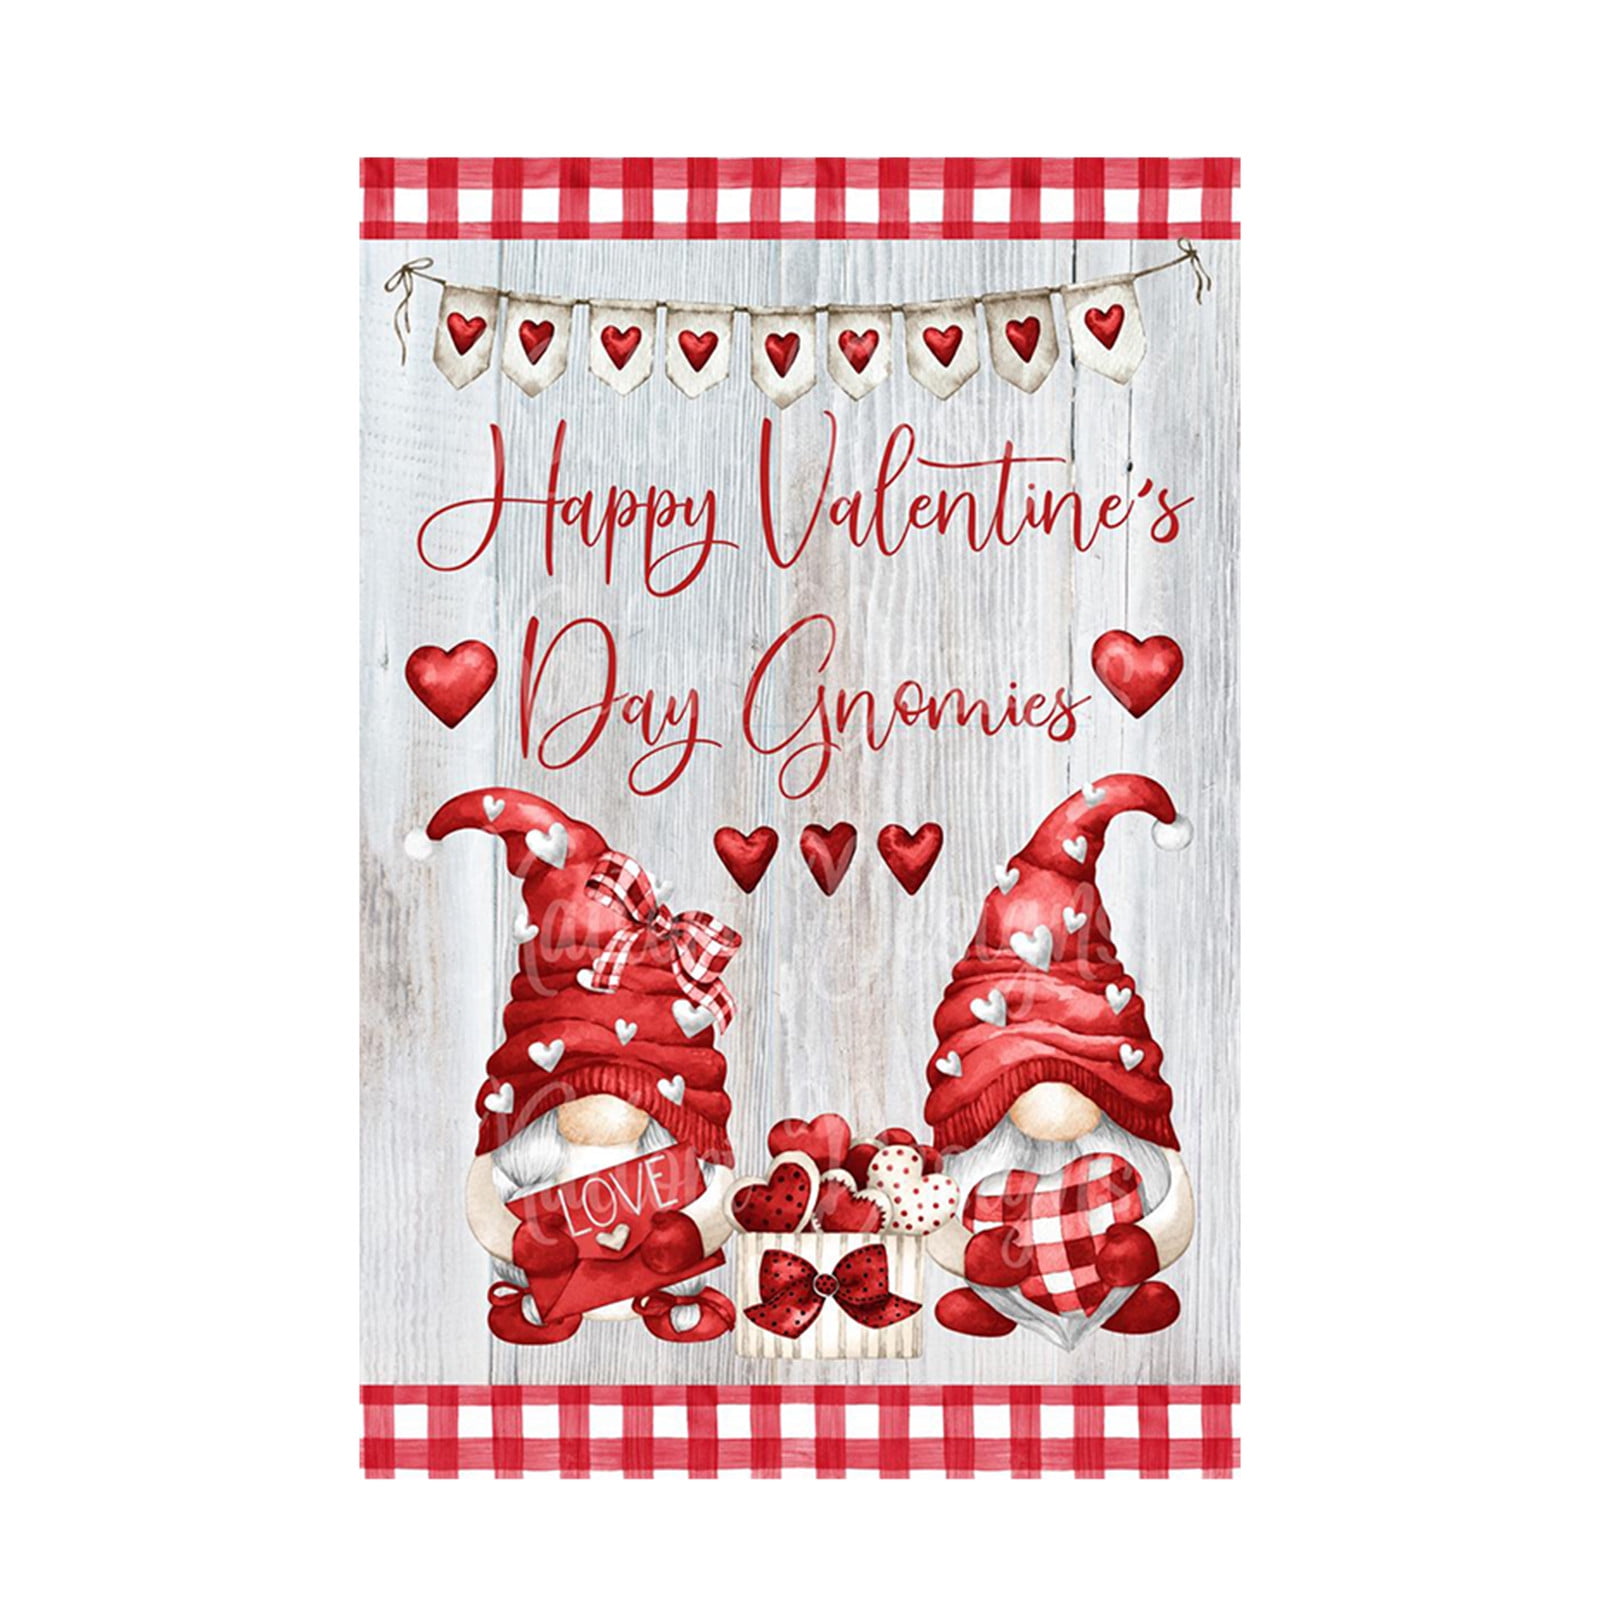 Color 1 Aozer Valentines Day Garden Flag 12 x 18 Inch Valentine Day Garden Flag with 1 Rubber Stopper and 1 Clear Anti-Wind Clip for Valentines Day Home Garden Wedding Party Decorations